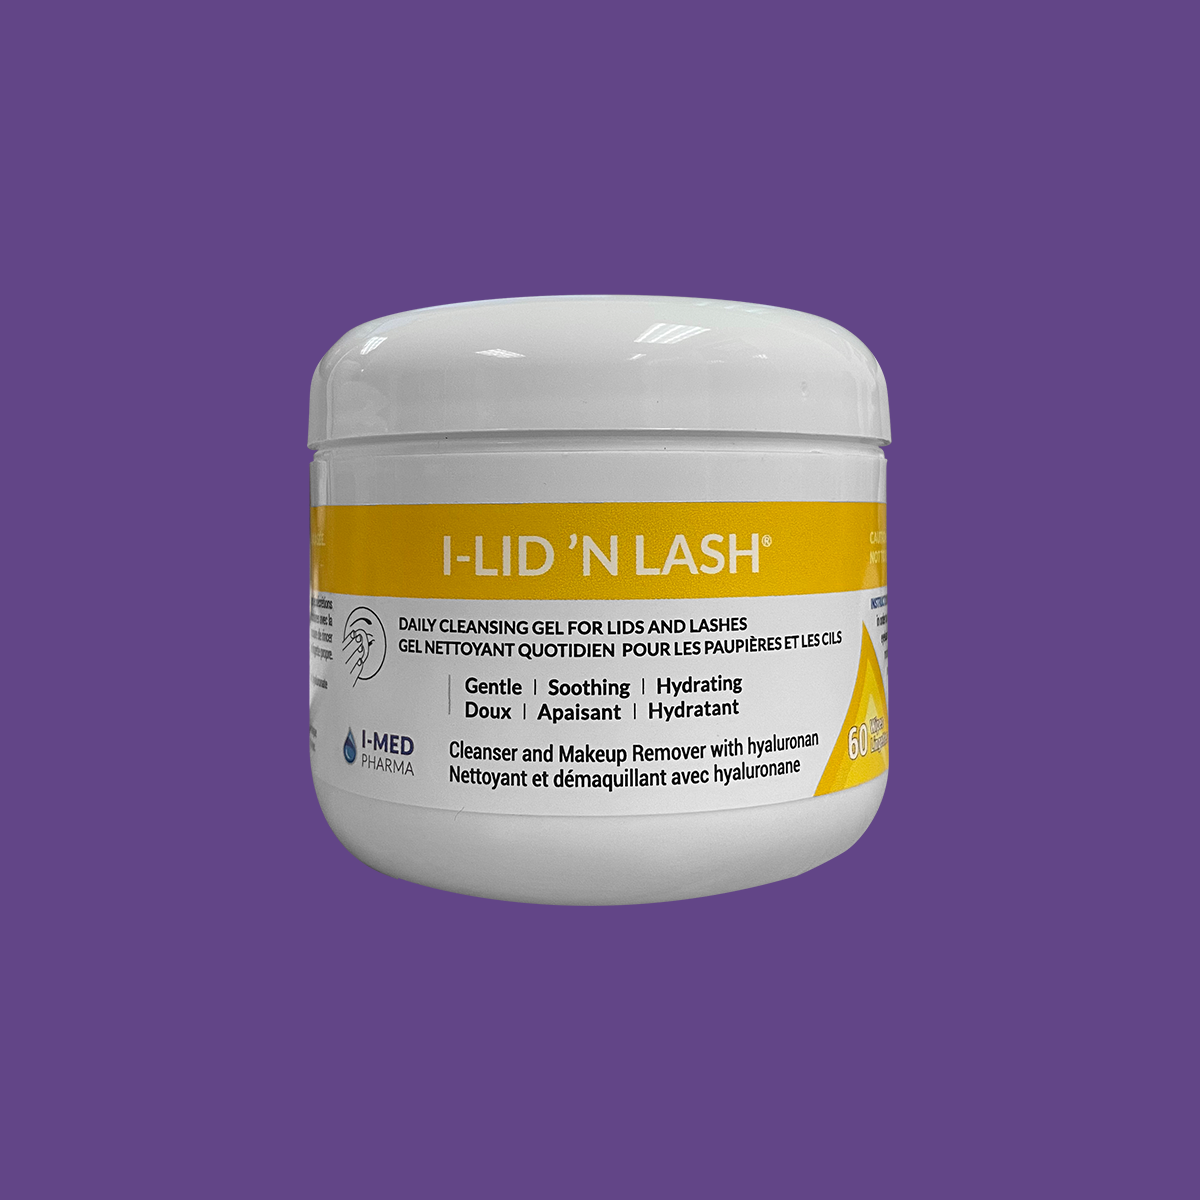 I-Lid ’n Lash Lid and Lash Hygiene Wipes to Cleanse and Hydrate (60 Wipes) 2 Month Supply